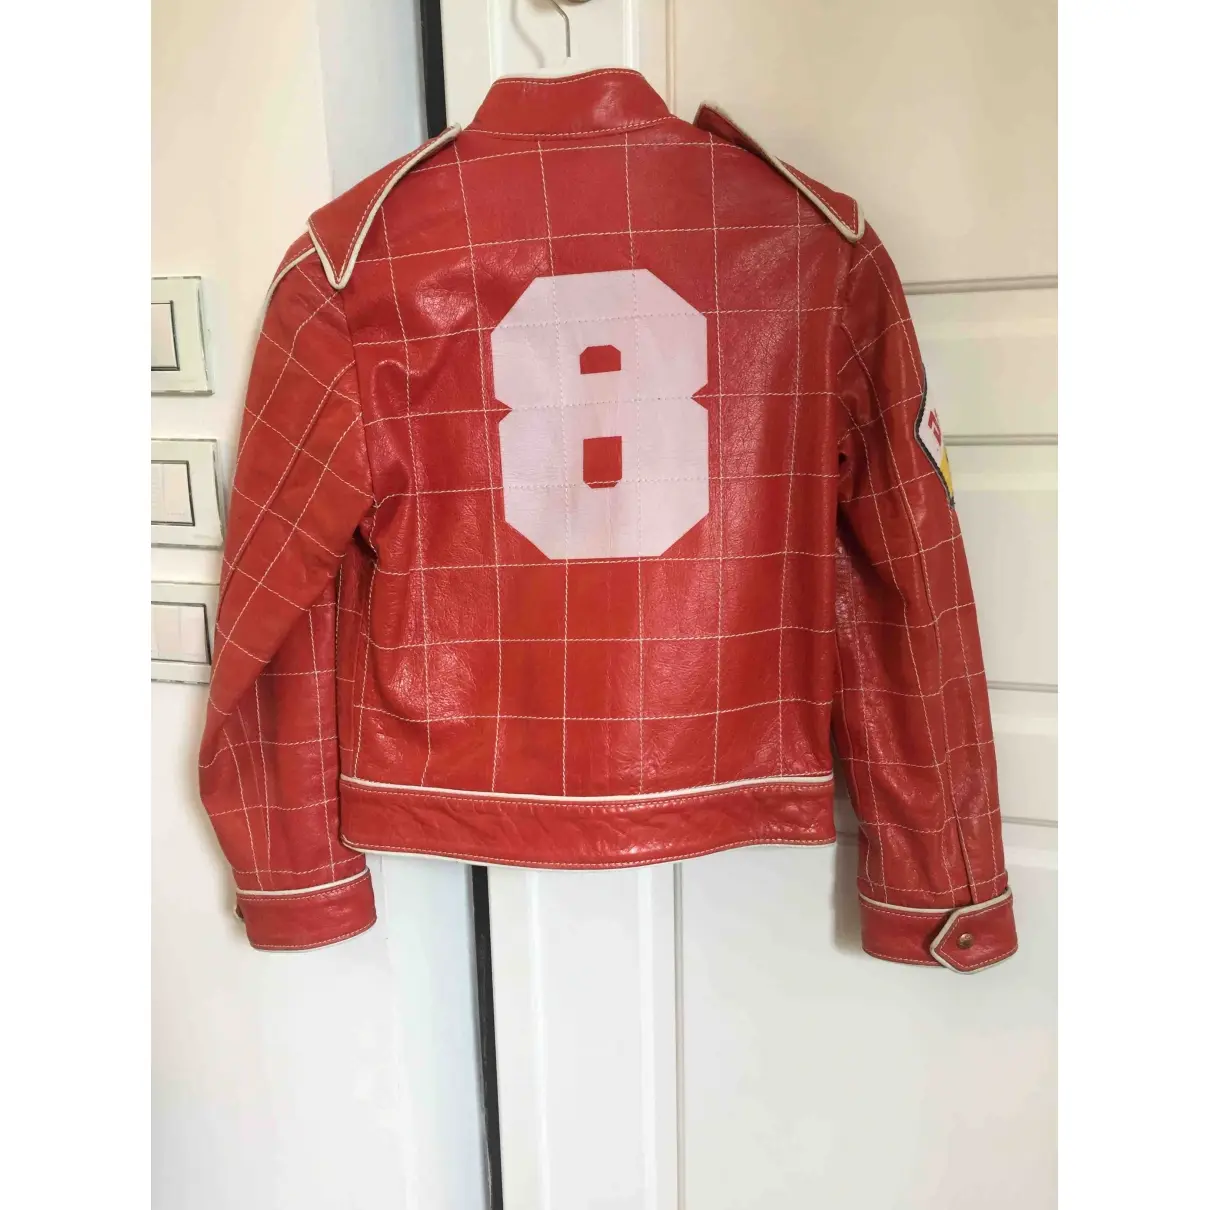 D&G Leather jacket for sale